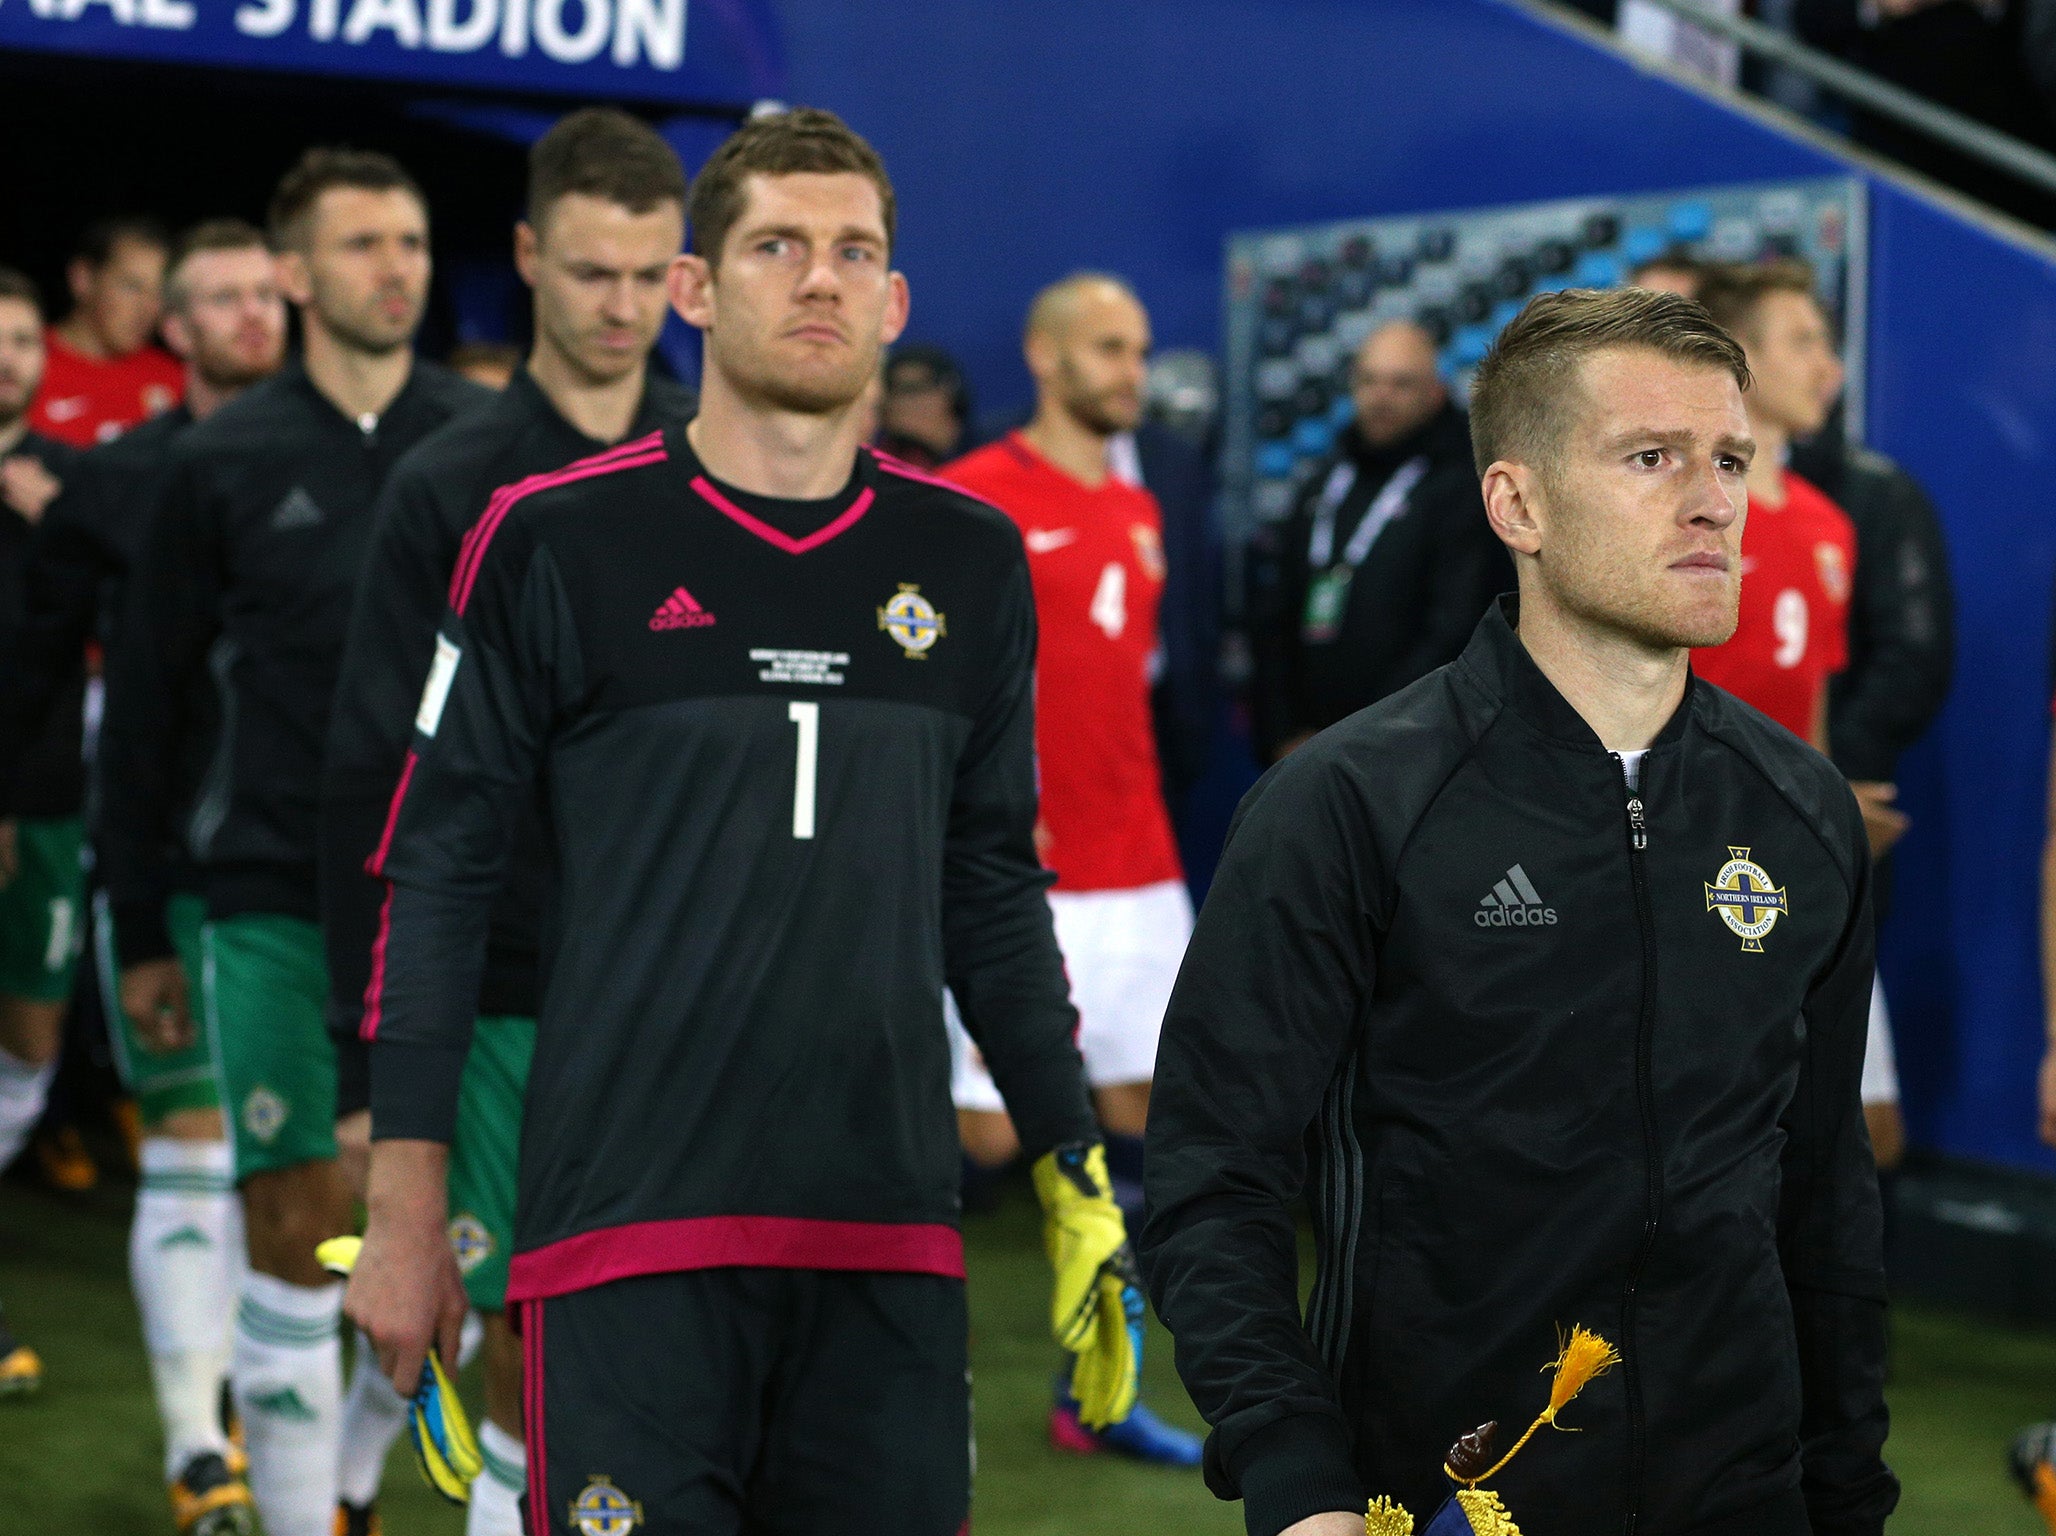 Davis leading his team out against Norway